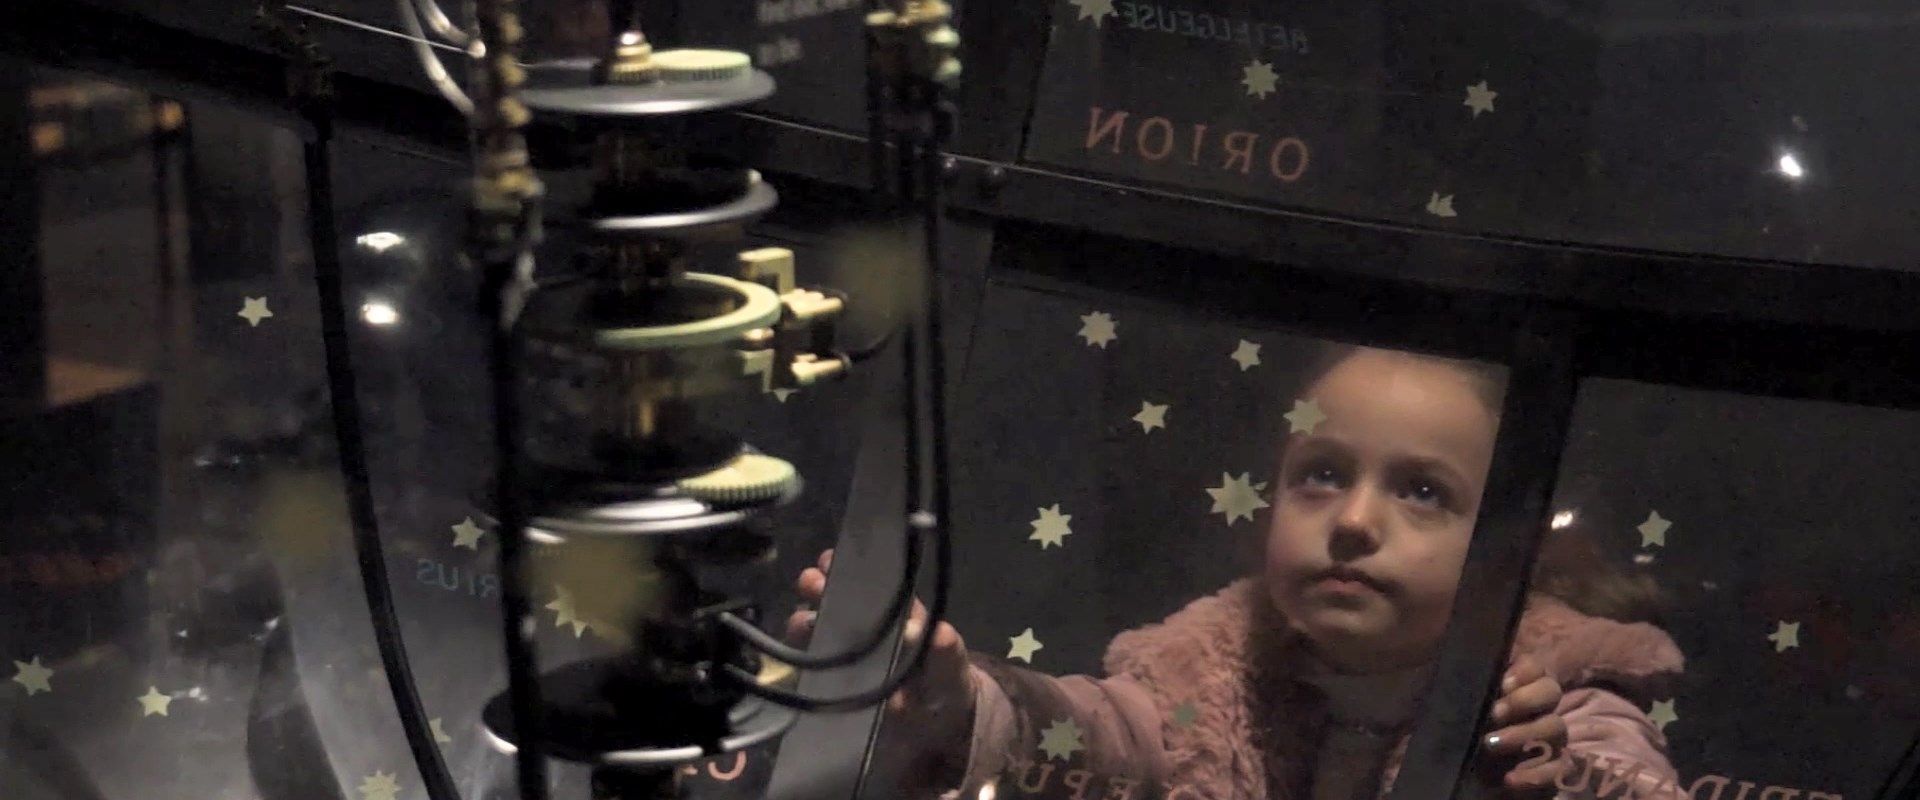 young girl fascinated by the orrery at national museums scotland www.completelynormalmedia.com